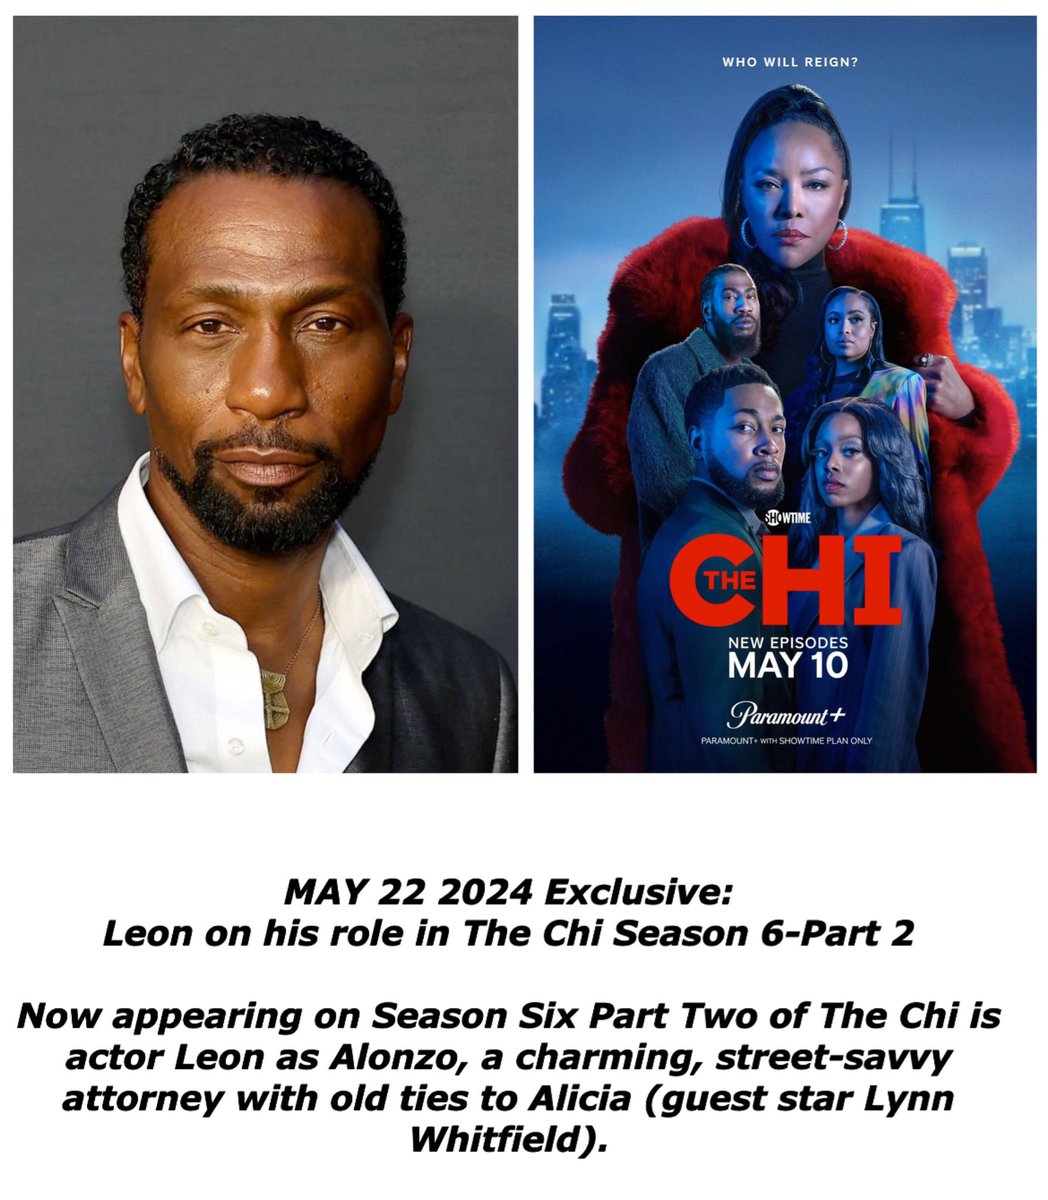 Now appearing on Season Six Part Two of The Chi is actor Leon as Alonzo, a charming, street-savvy attorney with old ties to Alicia (guest star Lynn Whitfield). Playing on Showtime and Paramount+ New episodes every Friday @shothechi #thechi @showtime @paramountplus